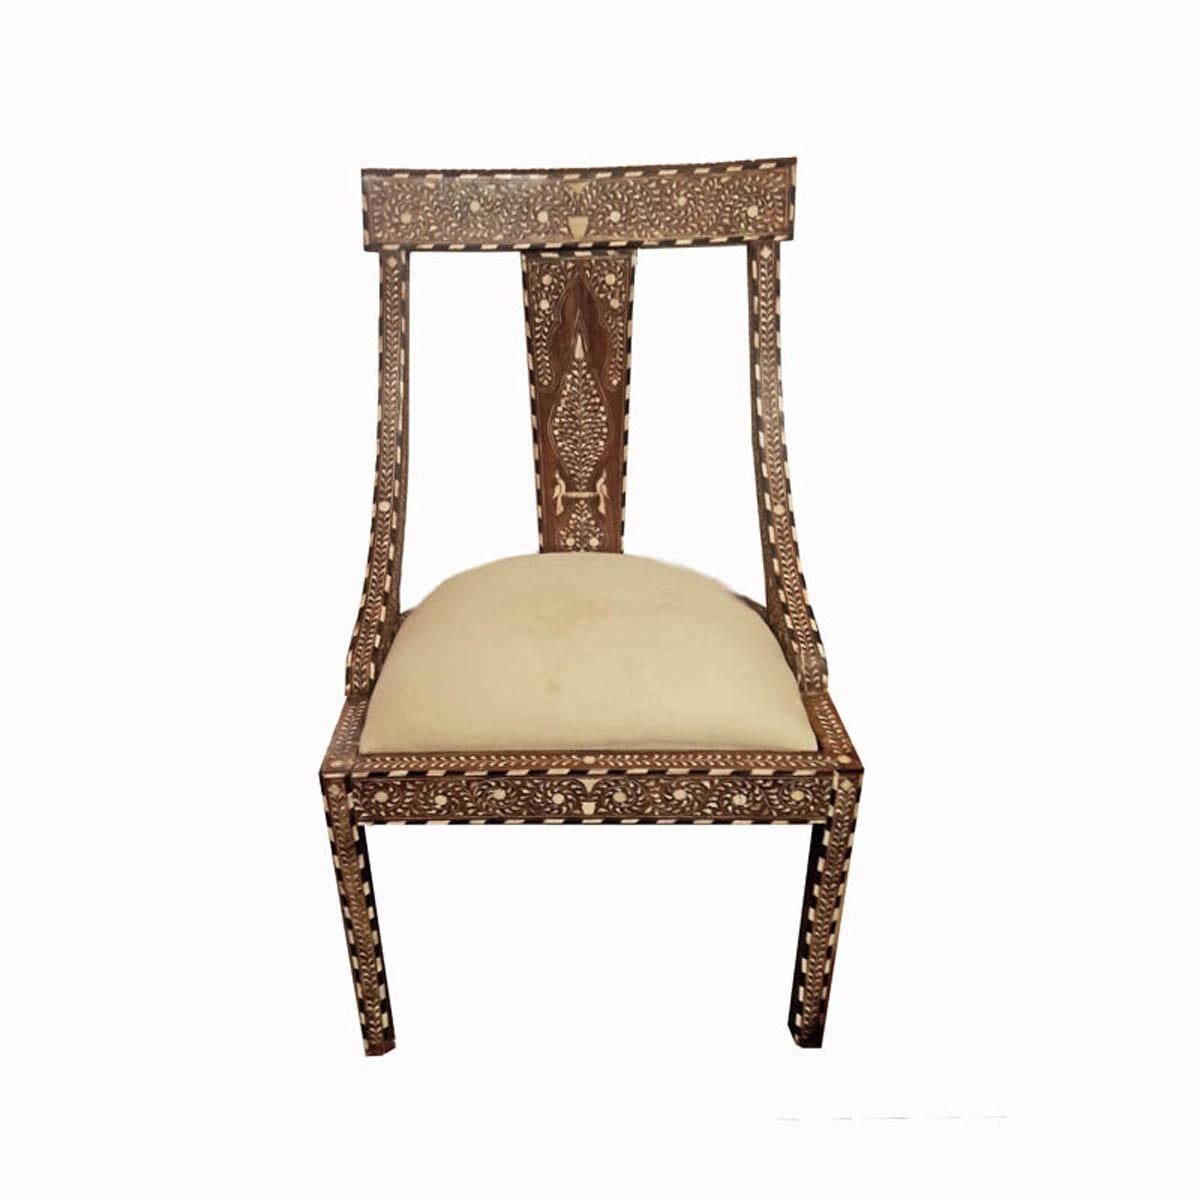 A beautiful teak chair with bone inlays, handmade in India. Classic inlay pattern throughout. The seat is detached and covered in neutral muslin, so it can be reupholstered to taste and to coordinate with any decor. Circa 1970. 

Two available.